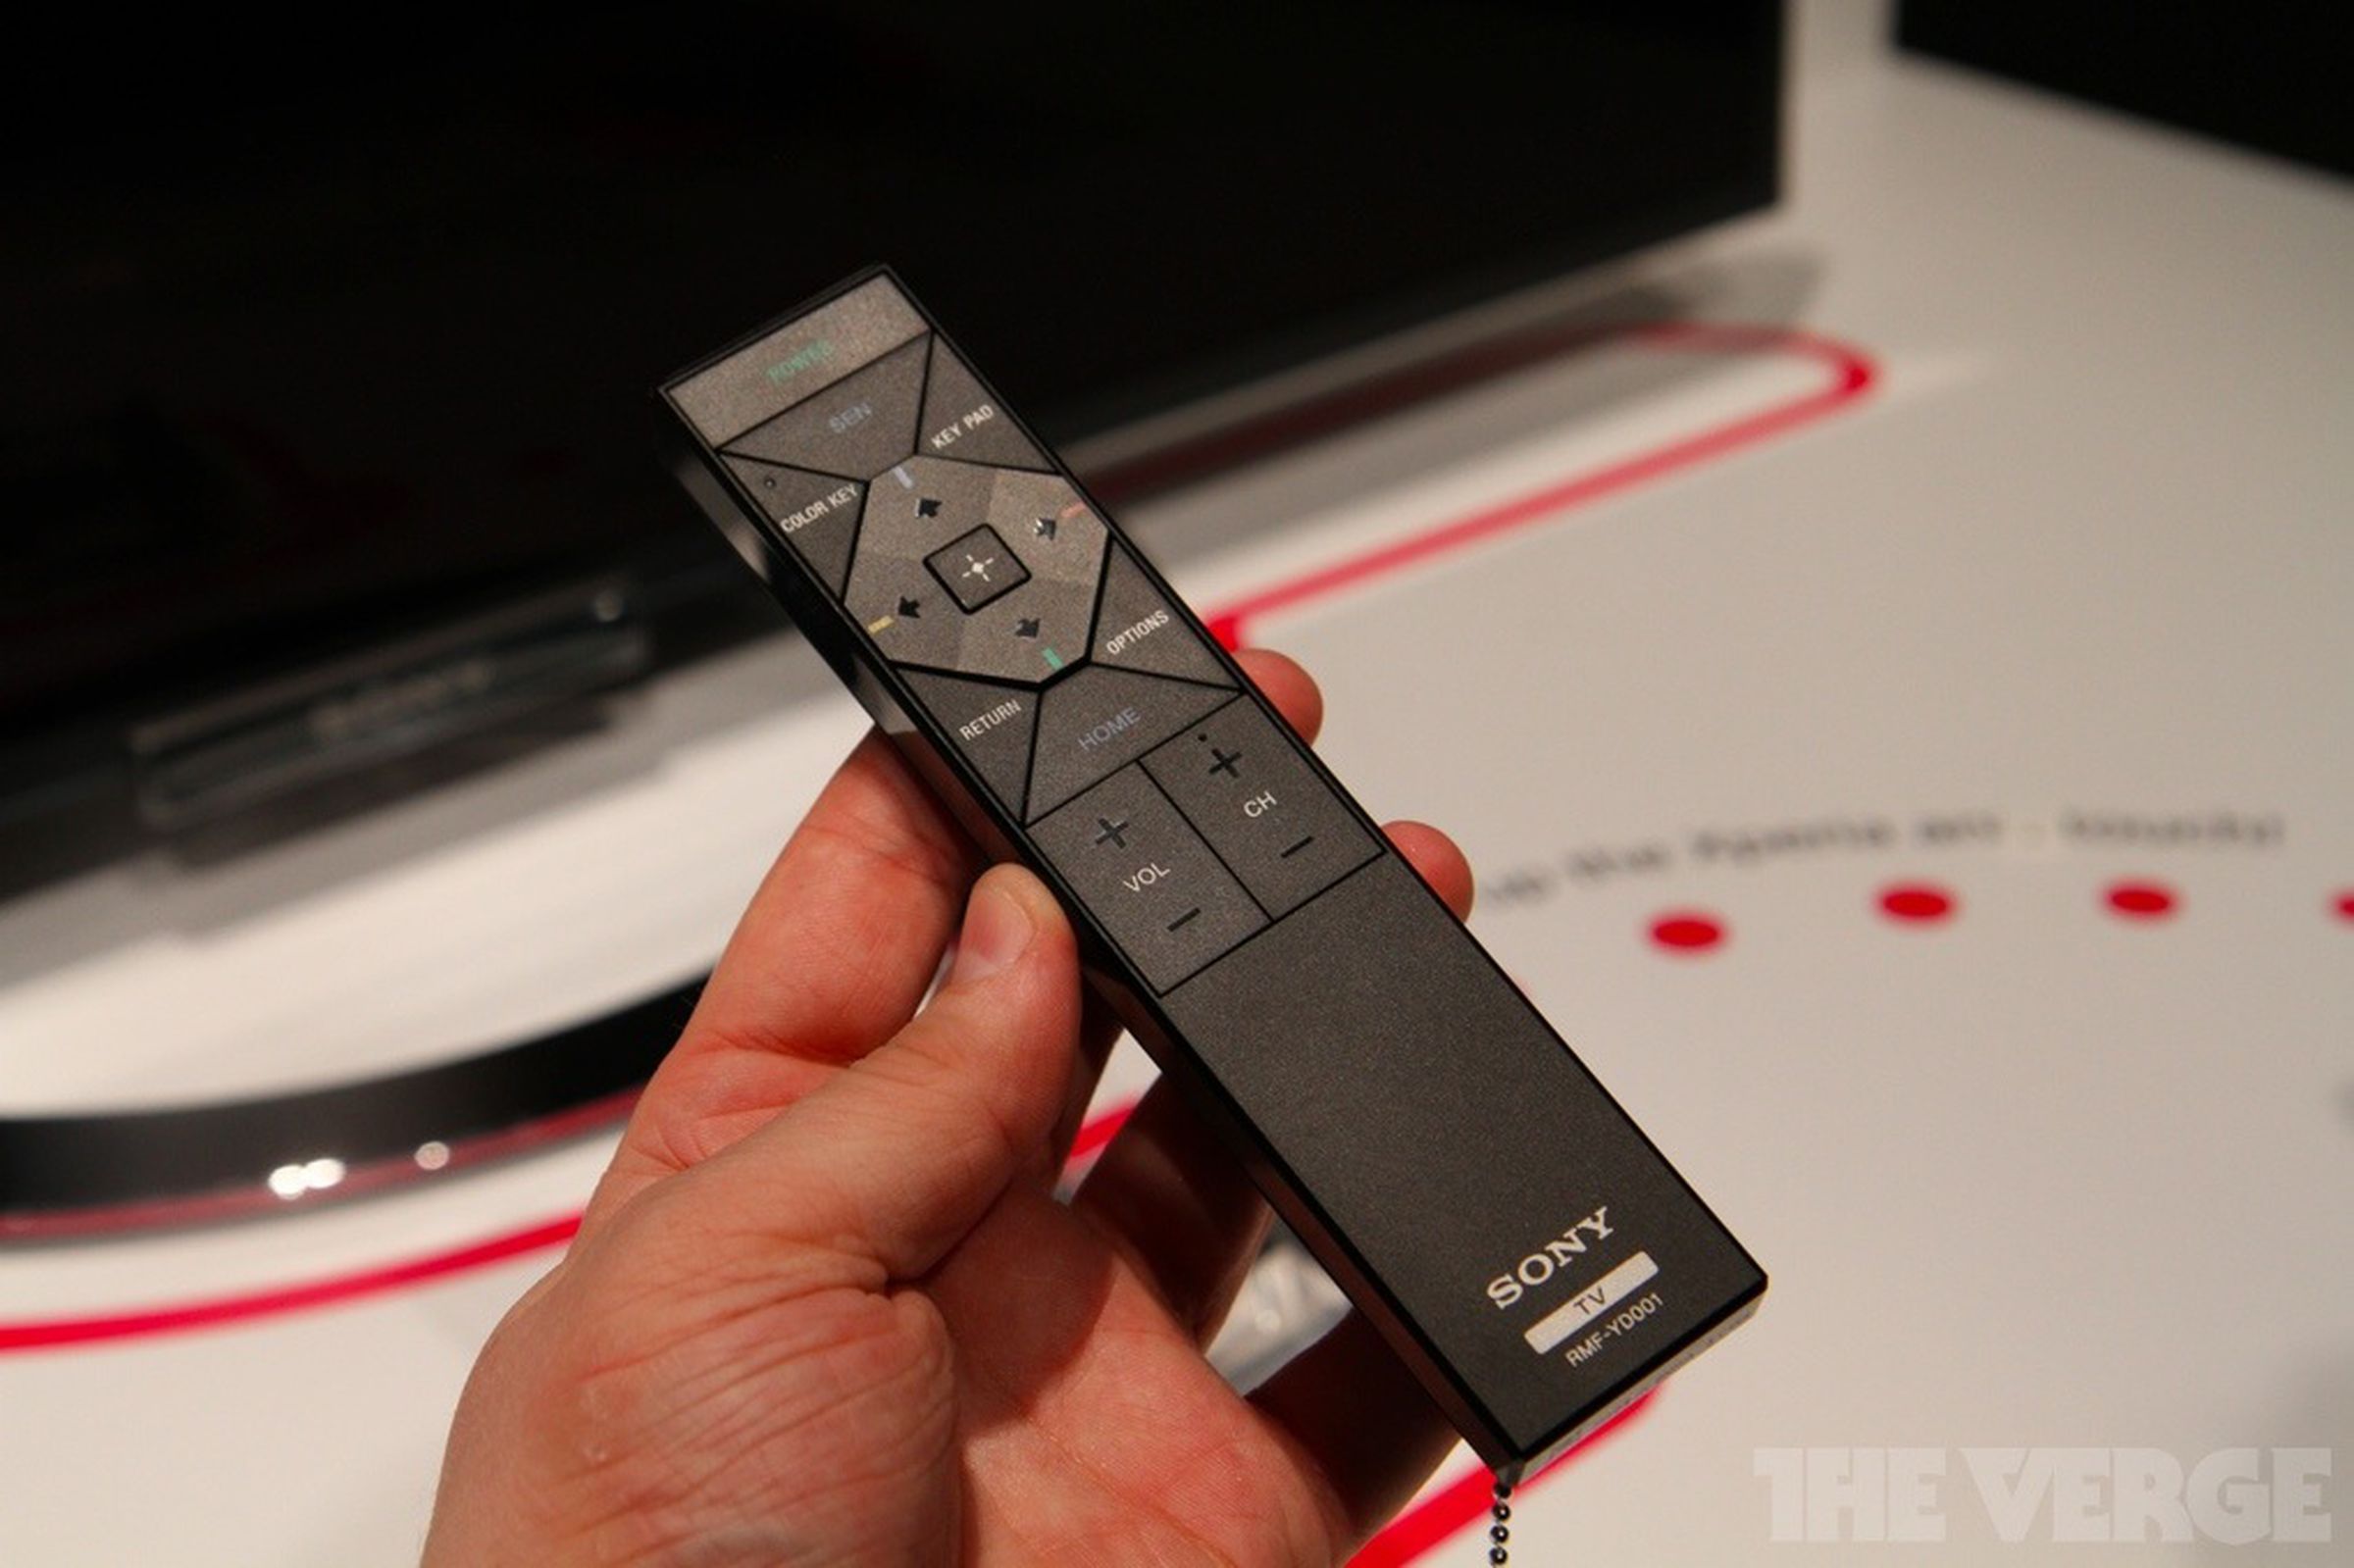 Sony NFC remote control hands-on photos